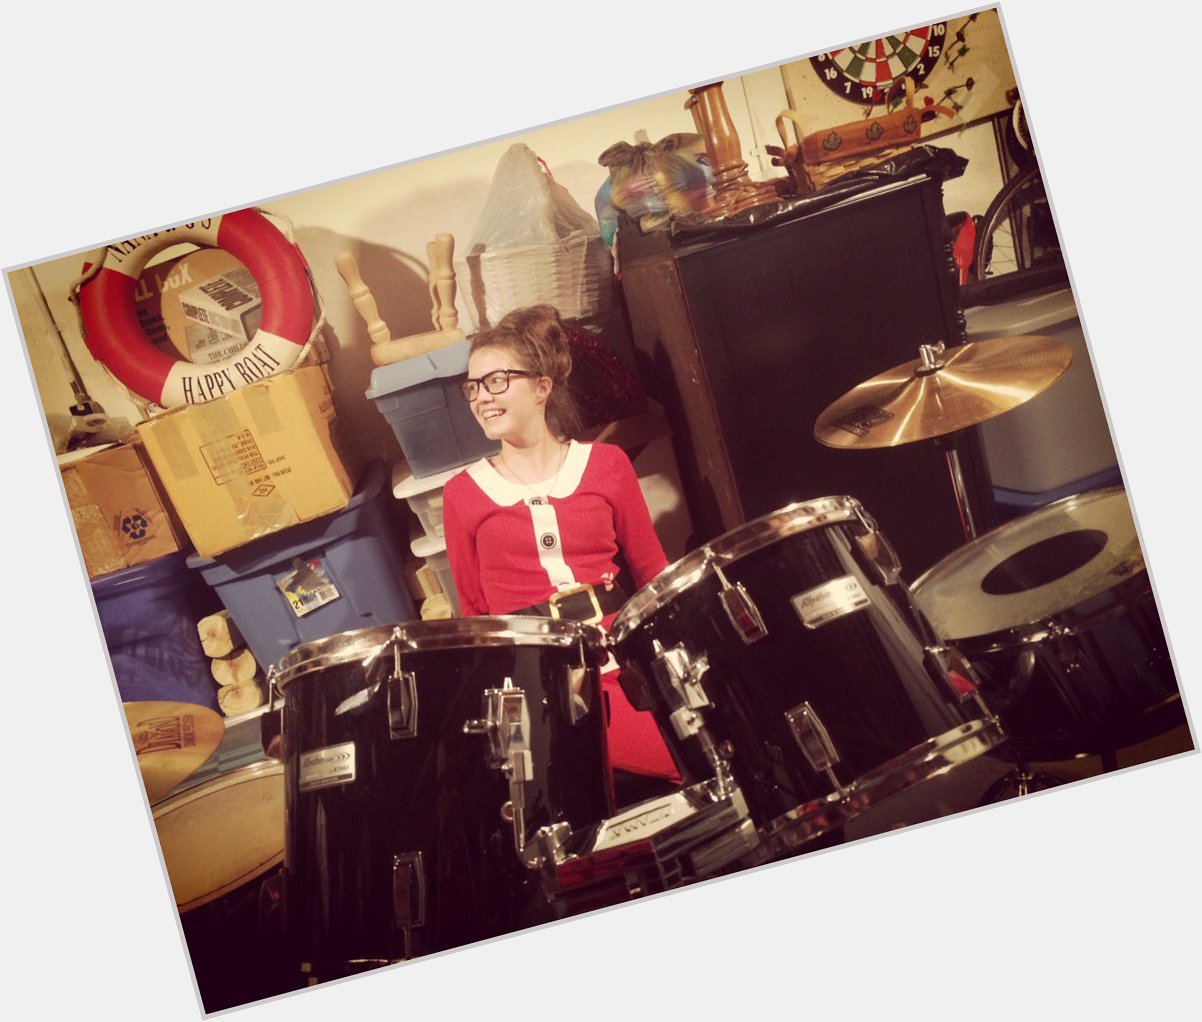  she got drums. Now what? She says \"happy birthday\" 